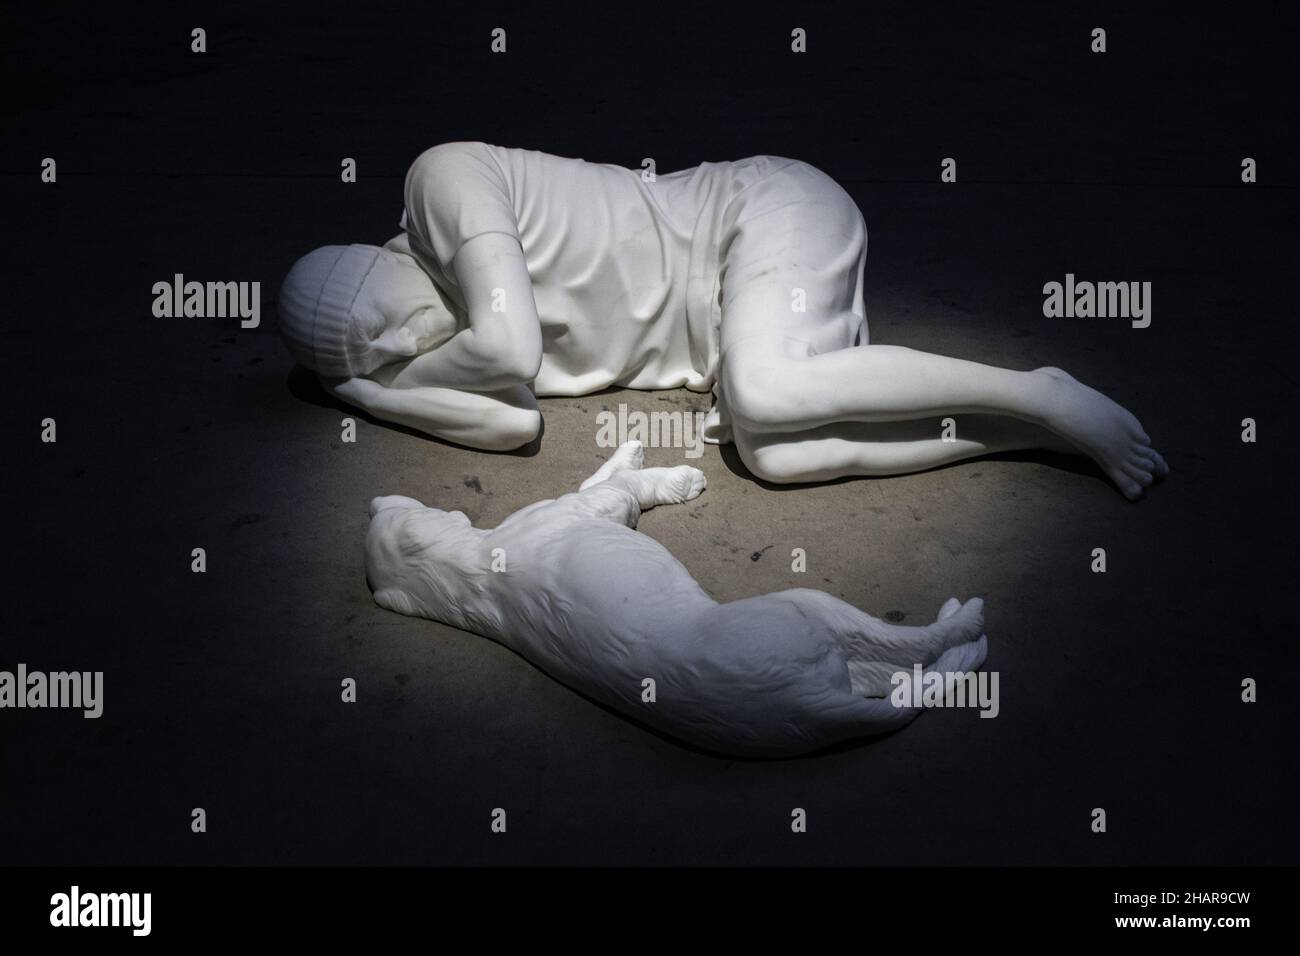 Hangar Bicoccca, Milan: view of Breath Ghosts Blind by Maurizio Cattelan, Carrara white marble sculpture of a person and a dog lying facing each other Stock Photo